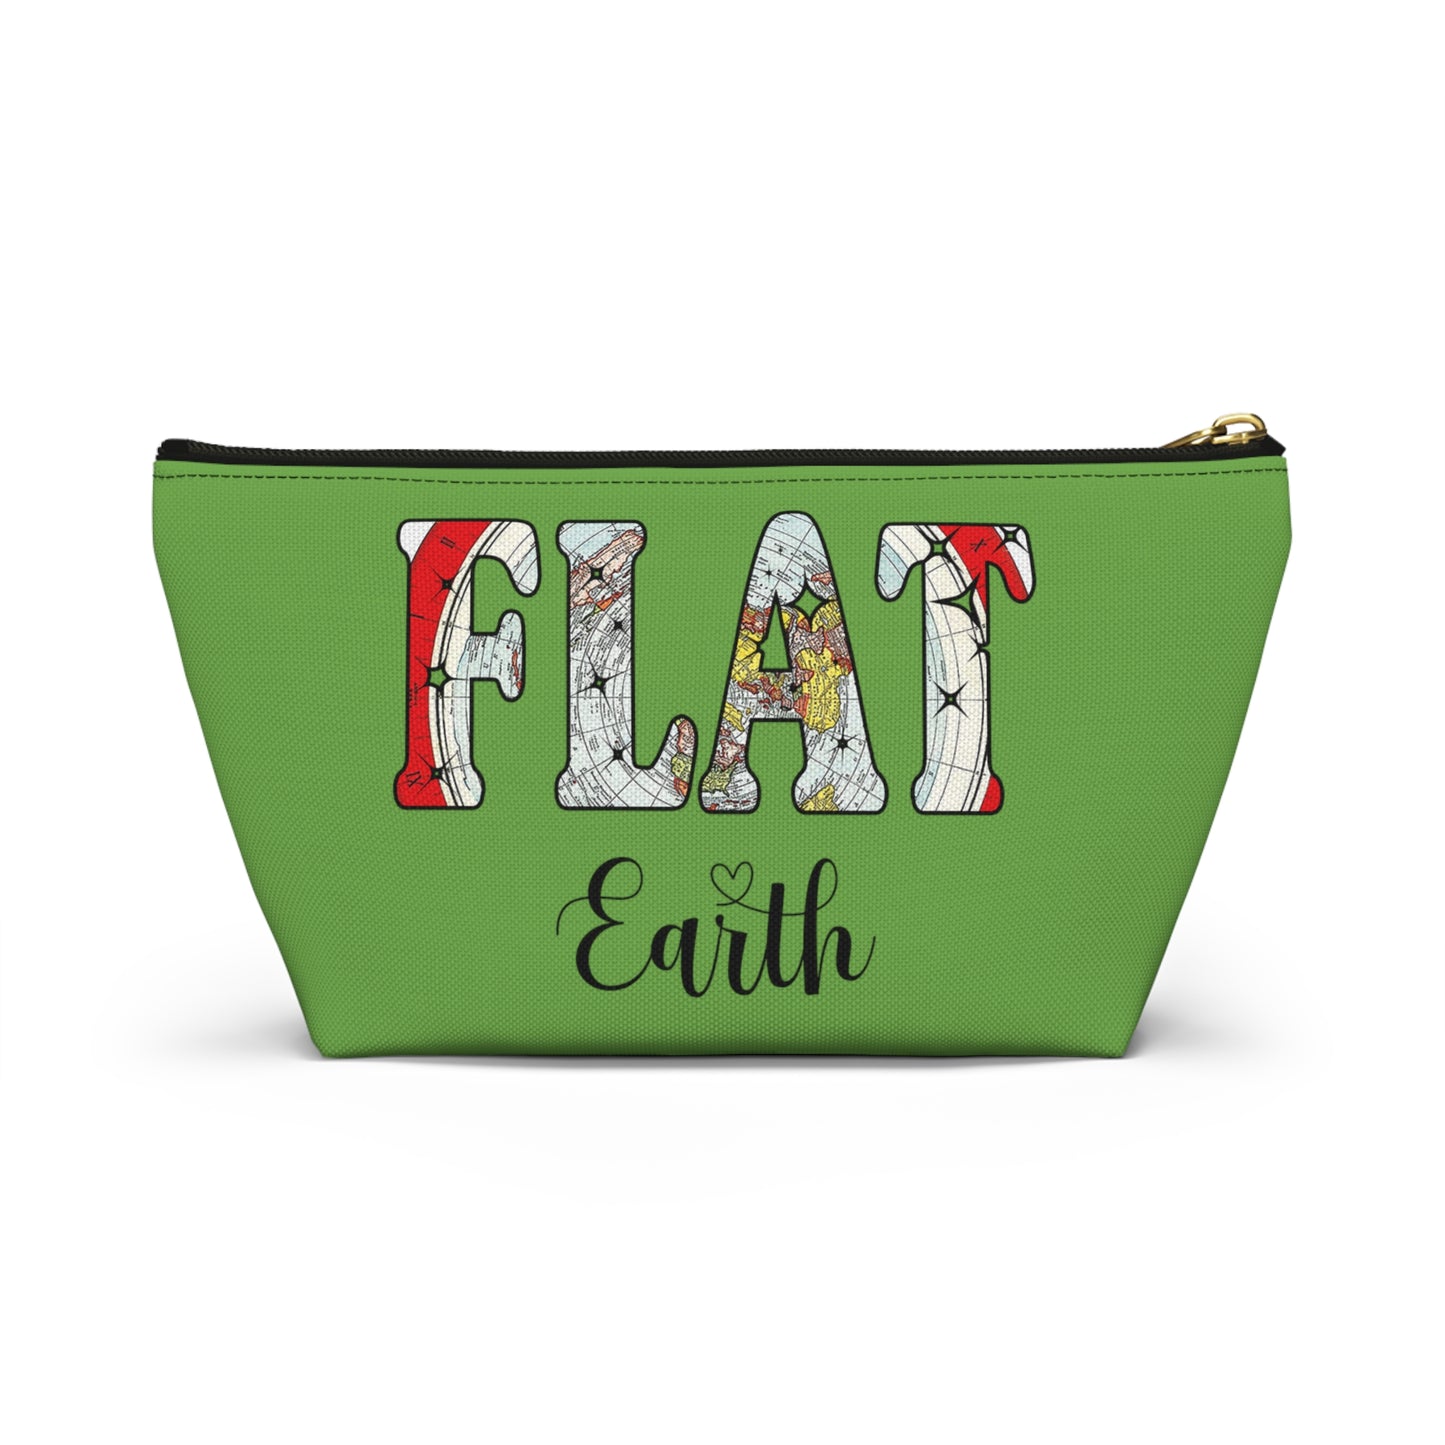 Flat Earth Accessory Pouch With T-bottom, Zipper Top Zipper Bag For Flat Earthers